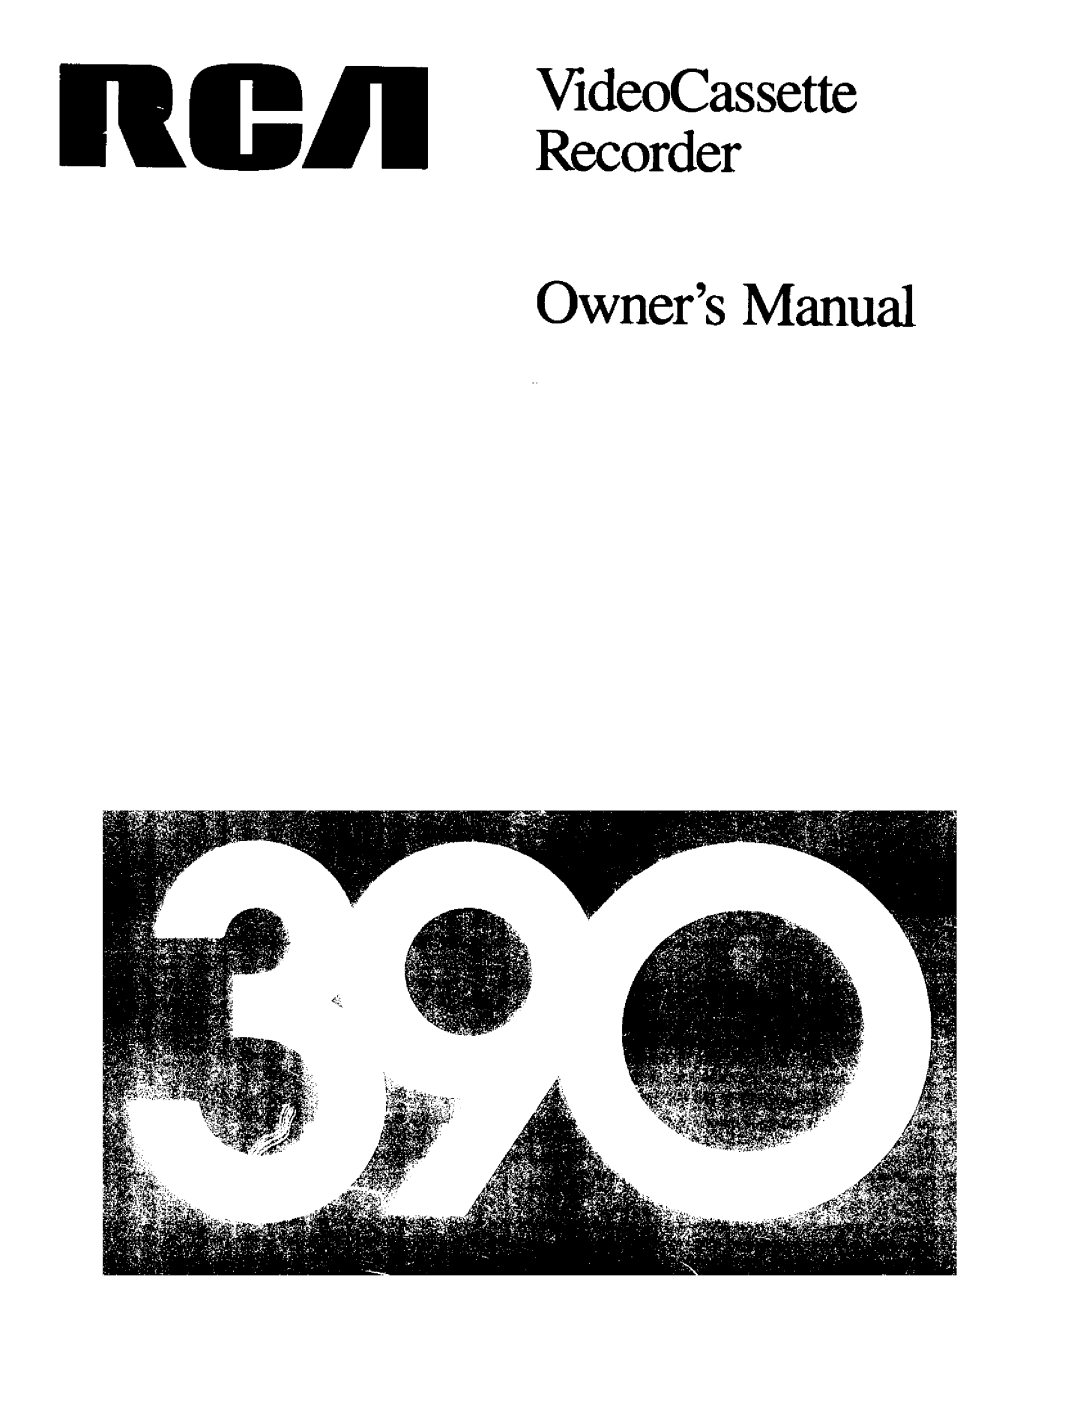 RCA 390 owner manual Owners Manual, VideoCassette Recorder 